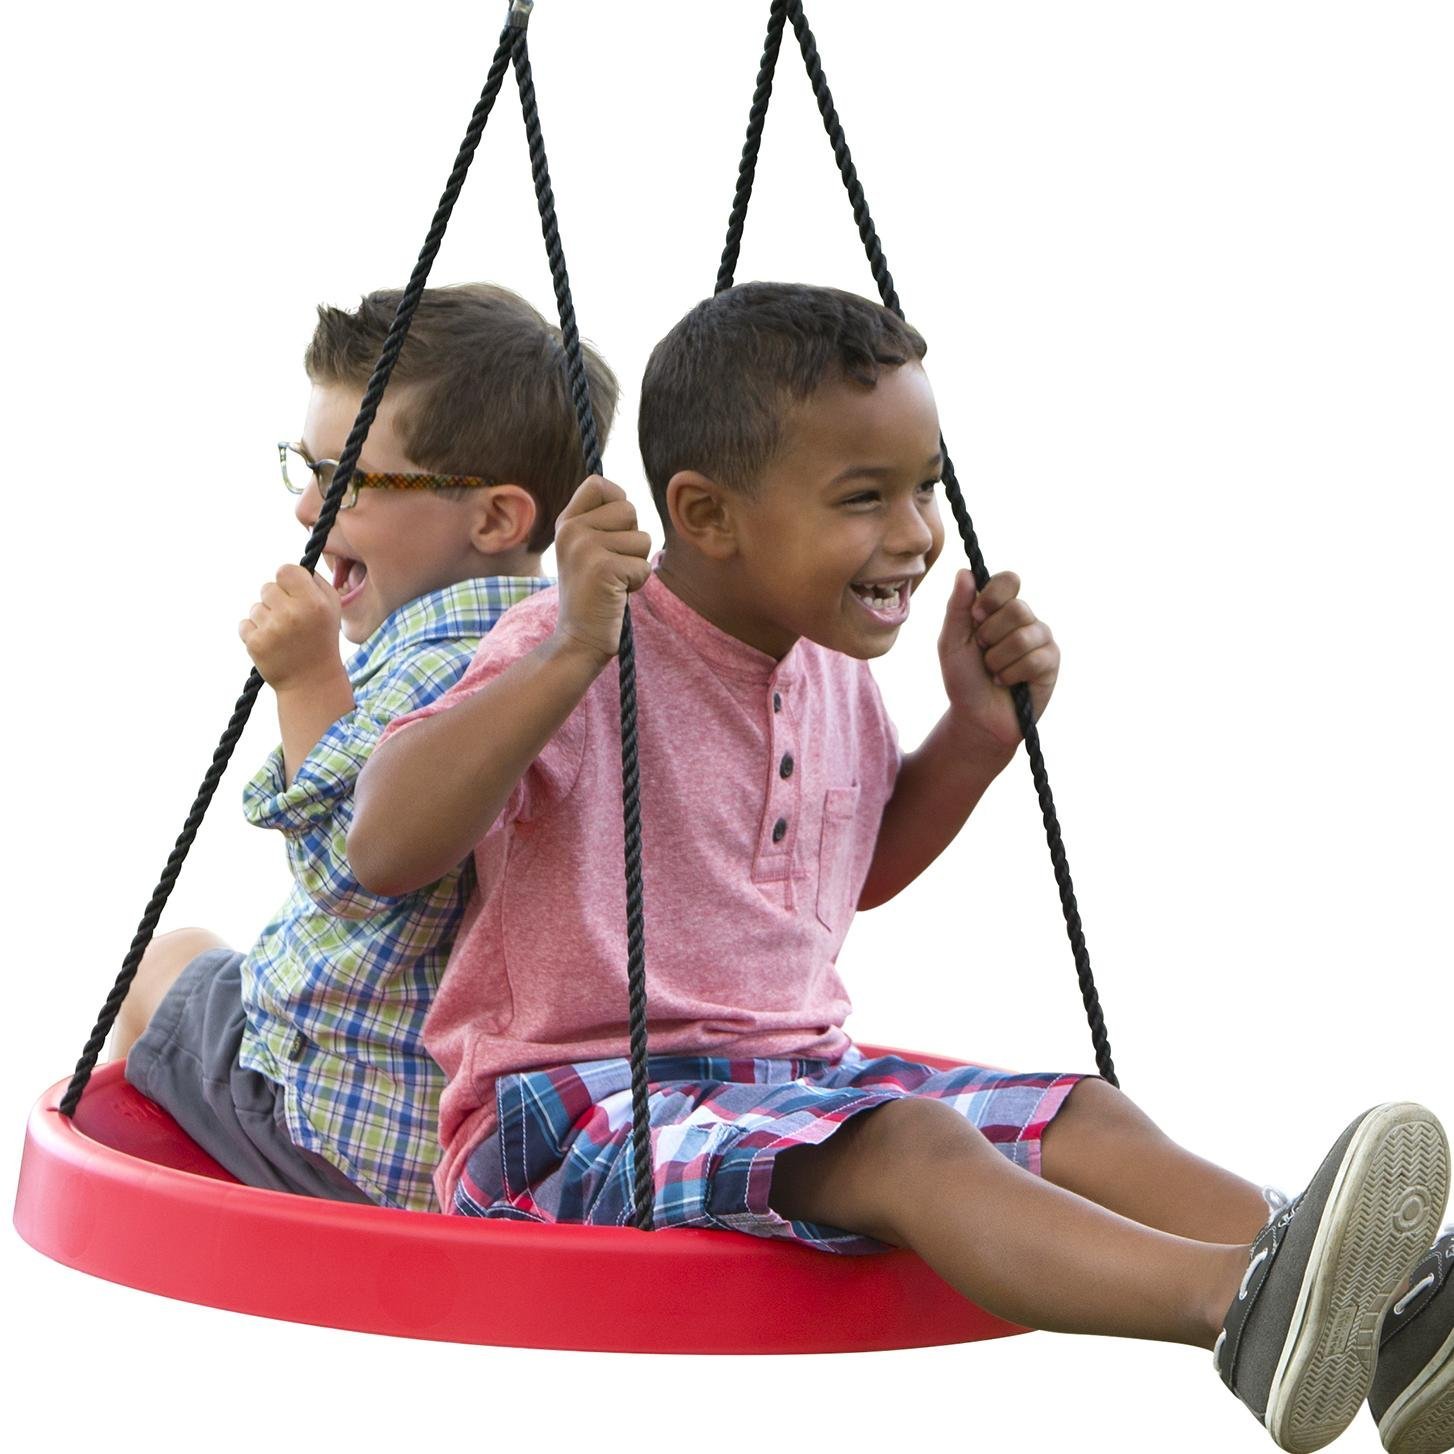 Amazon.com: Super Spinner Swing--Fun, Easy to Install on Swing Set ...